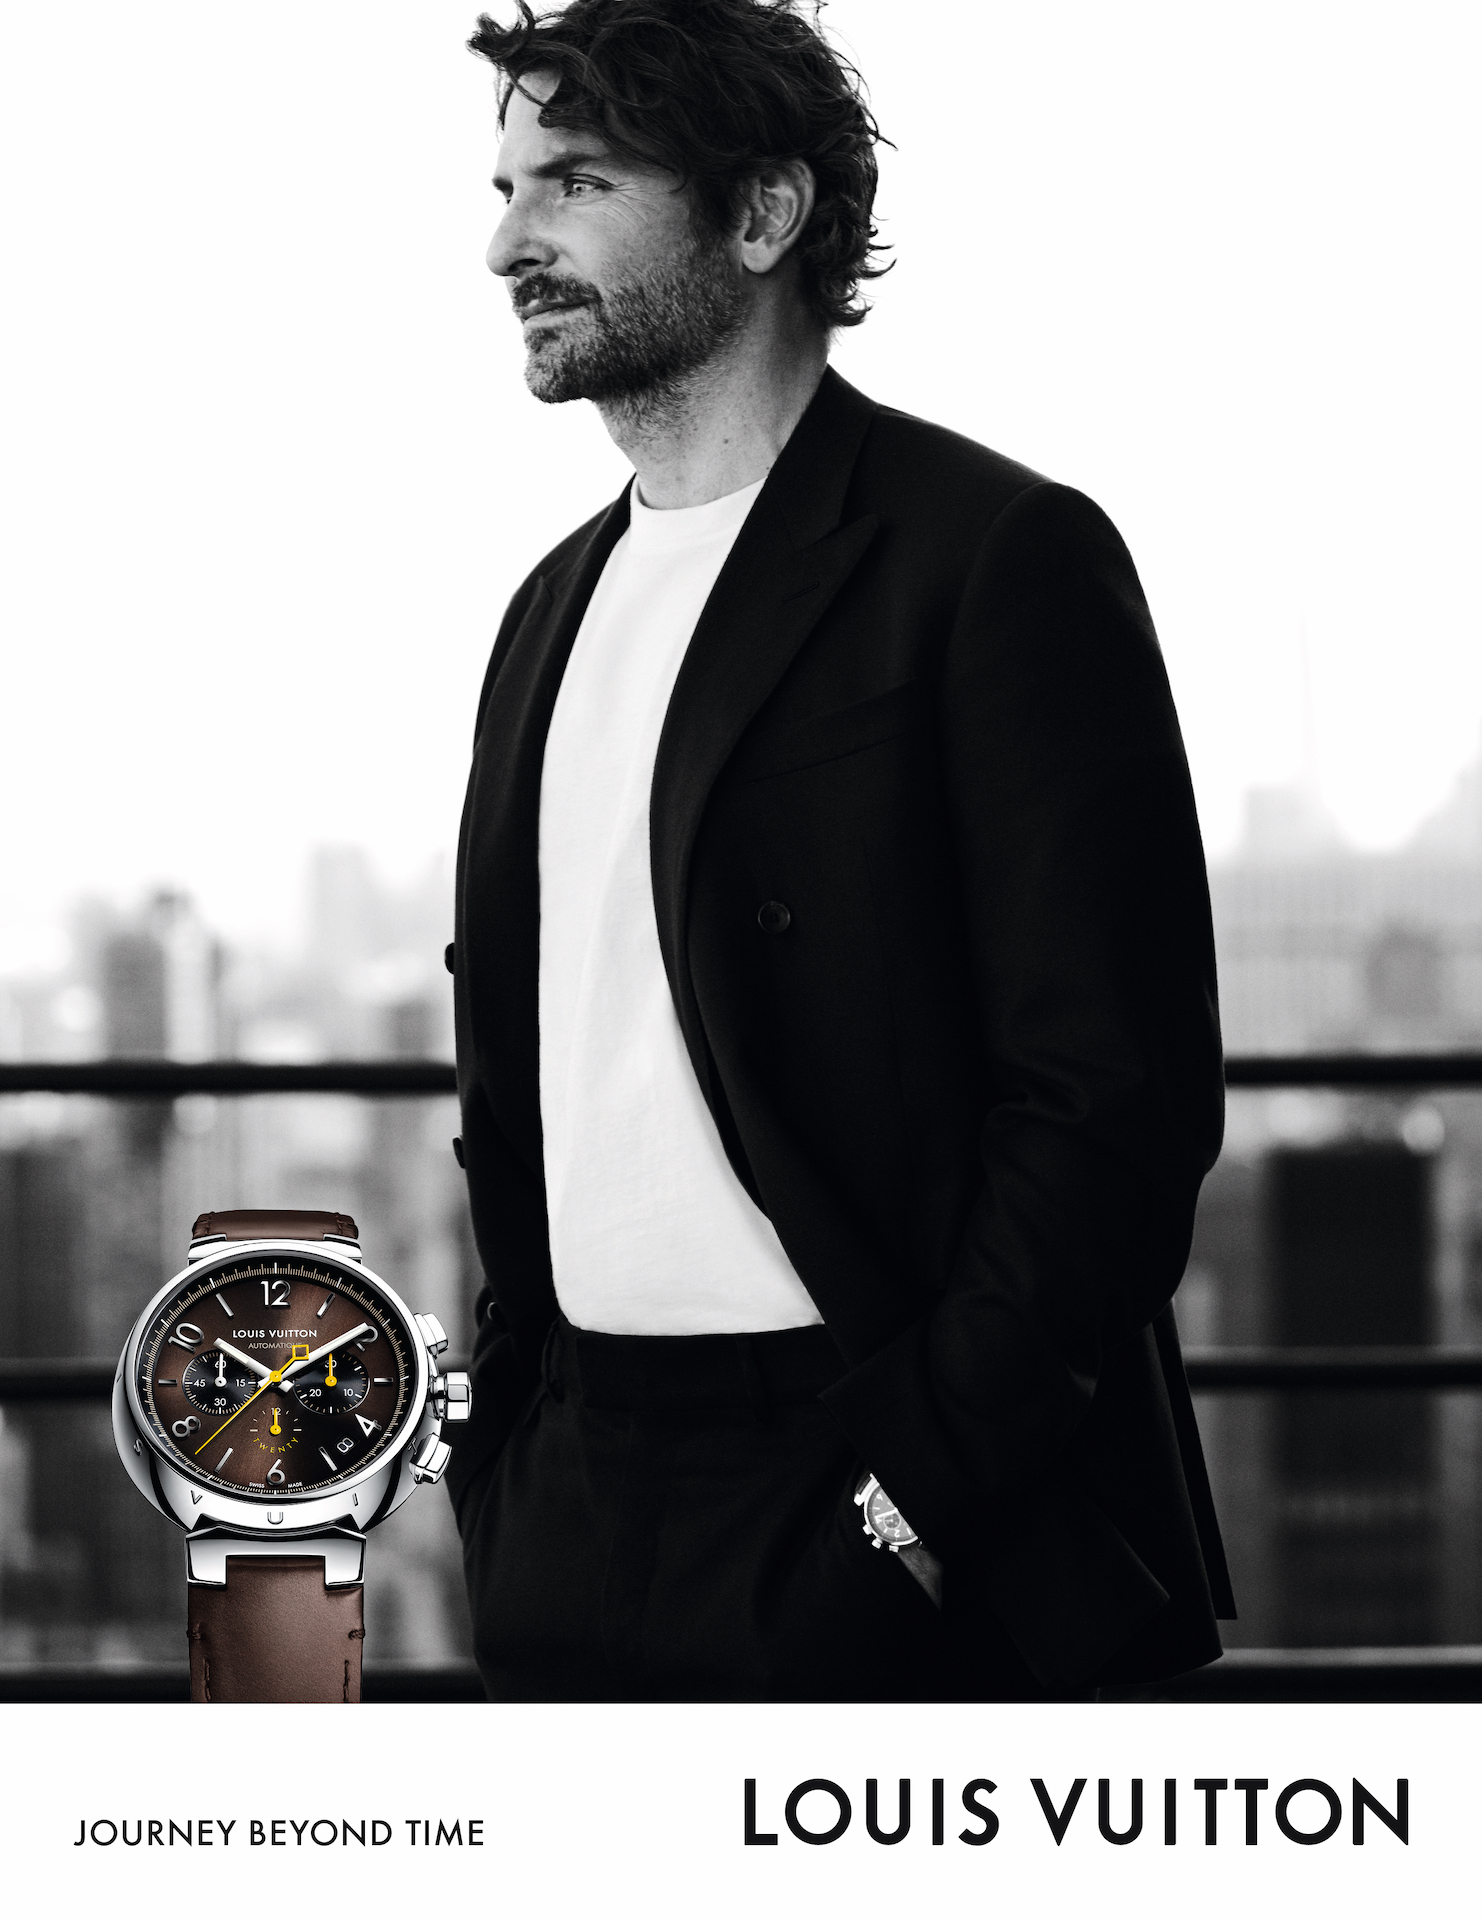 Louis Vuitton celebrates the 20th anniversary of the Tambour